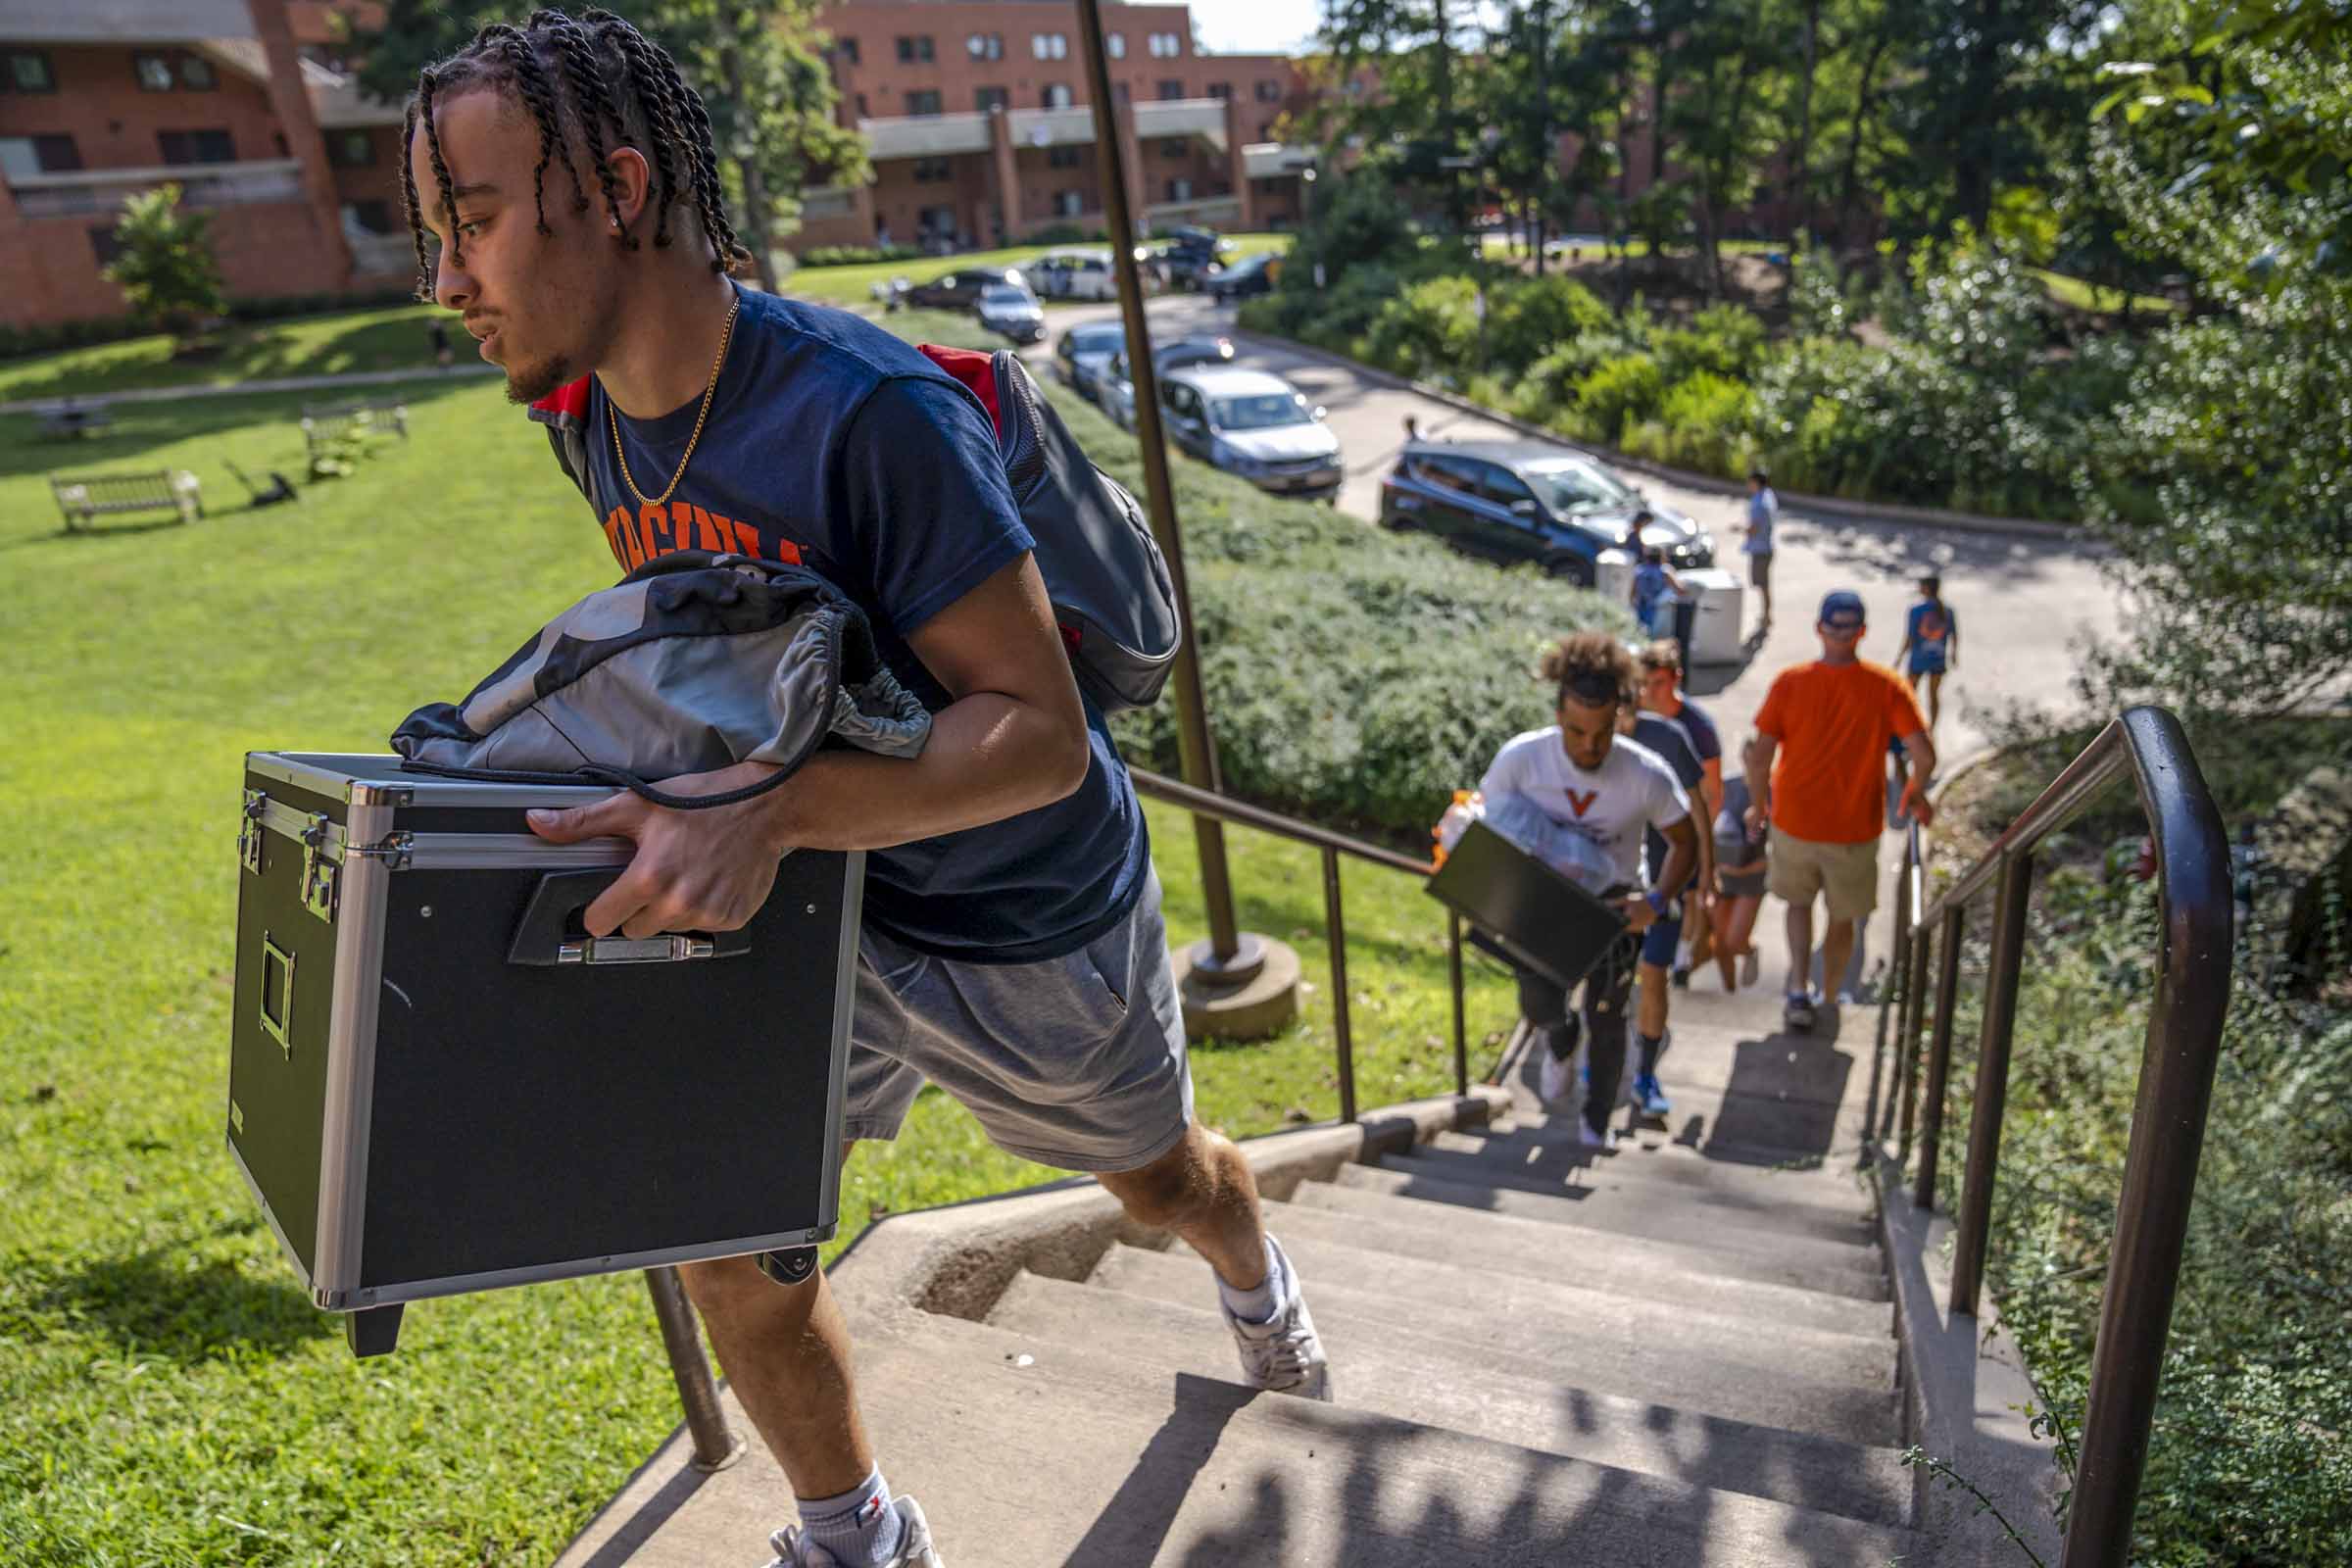 College students in Virginia shirts climb a flight of stairs while holding boxes